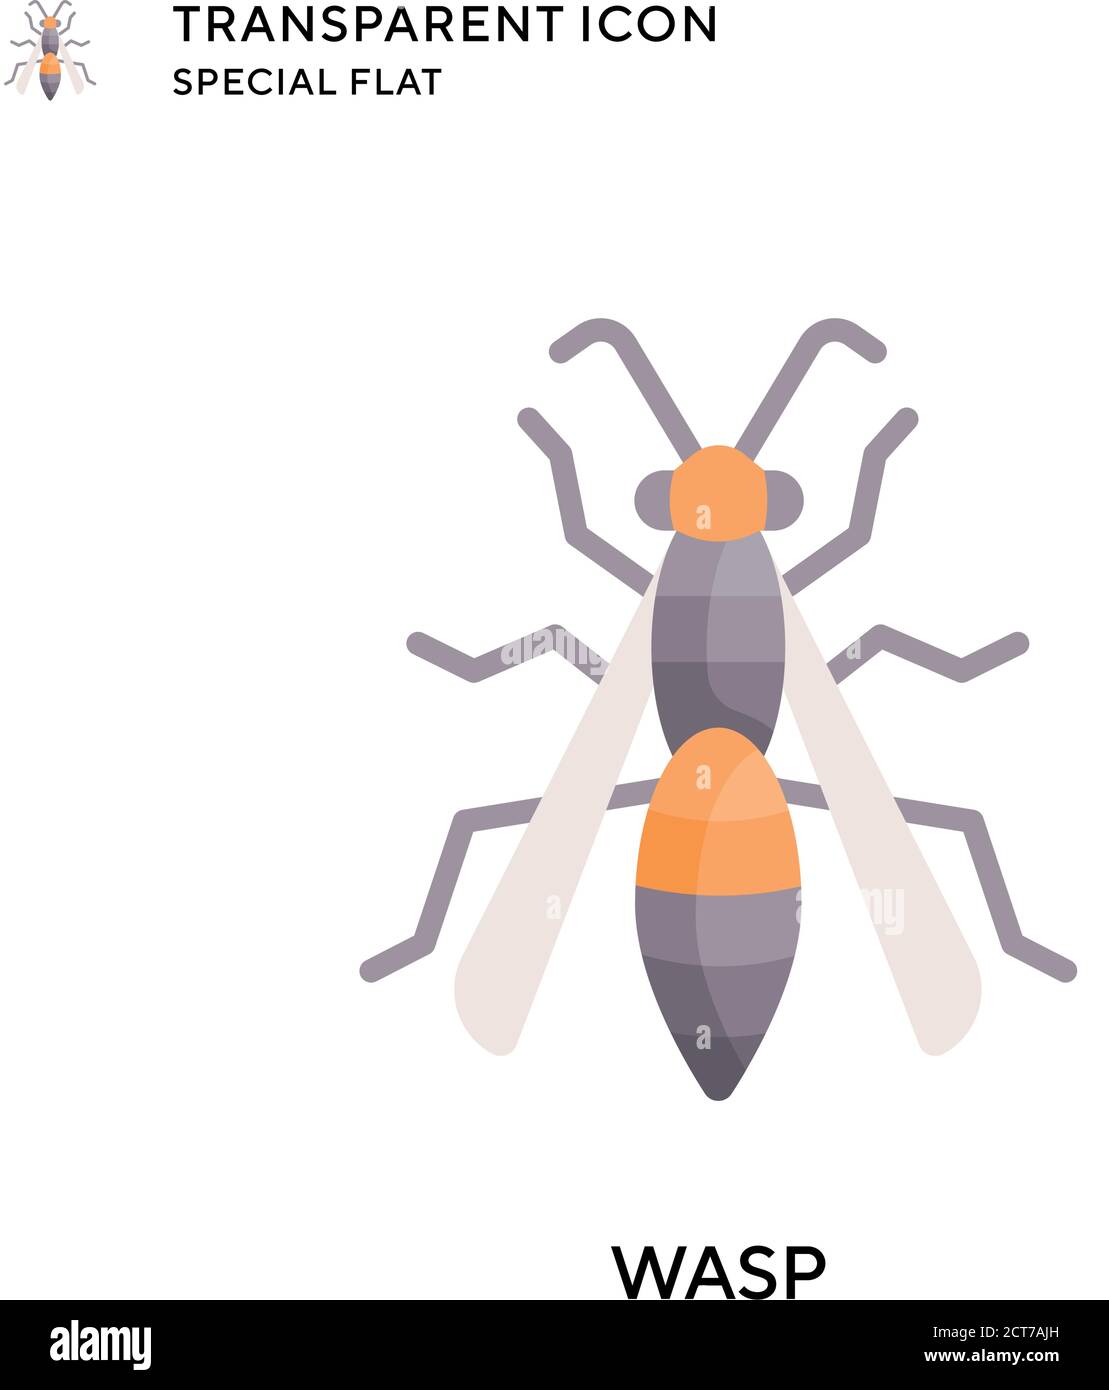 Wasp vector icon. Flat style illustration. EPS 10 vector. Stock Vector